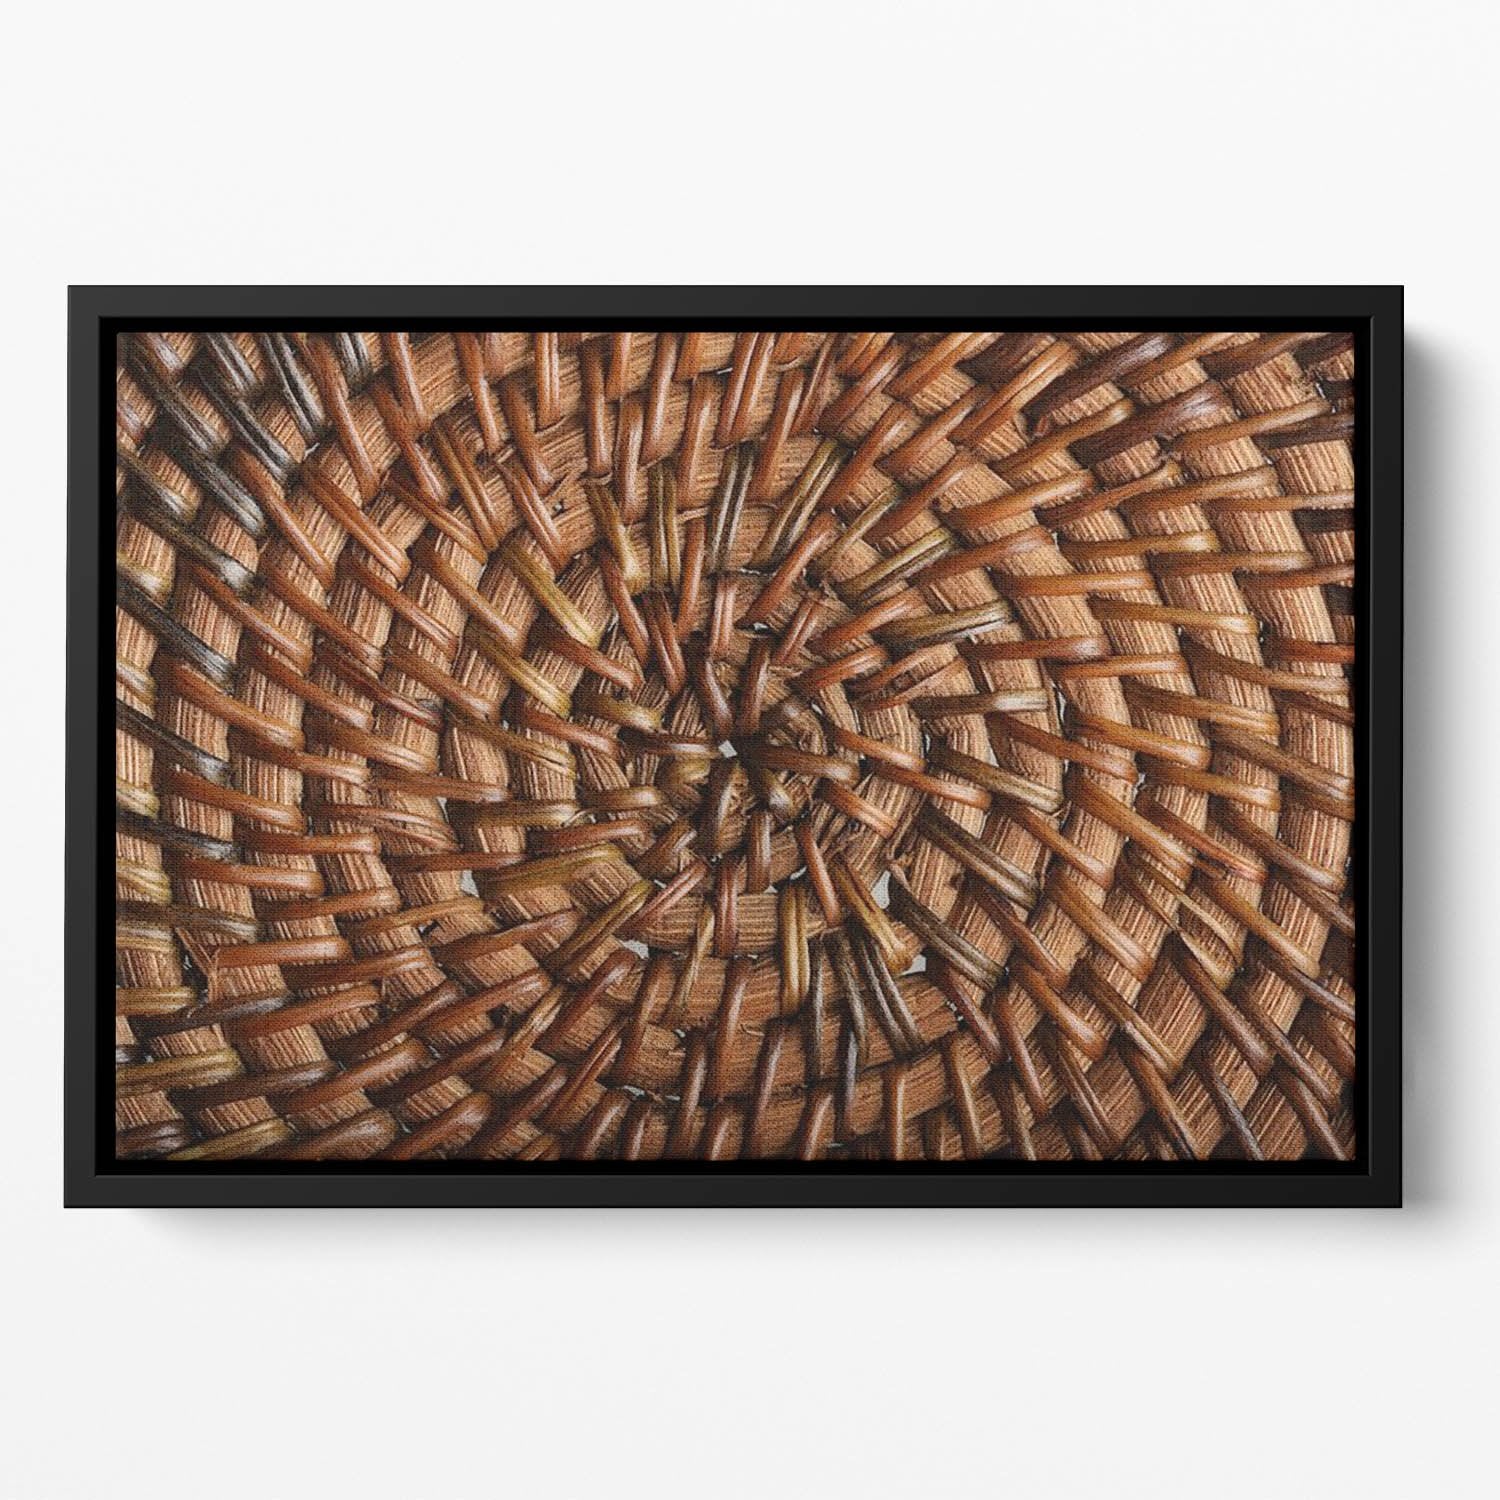 Woven wooden texture Floating Framed Canvas